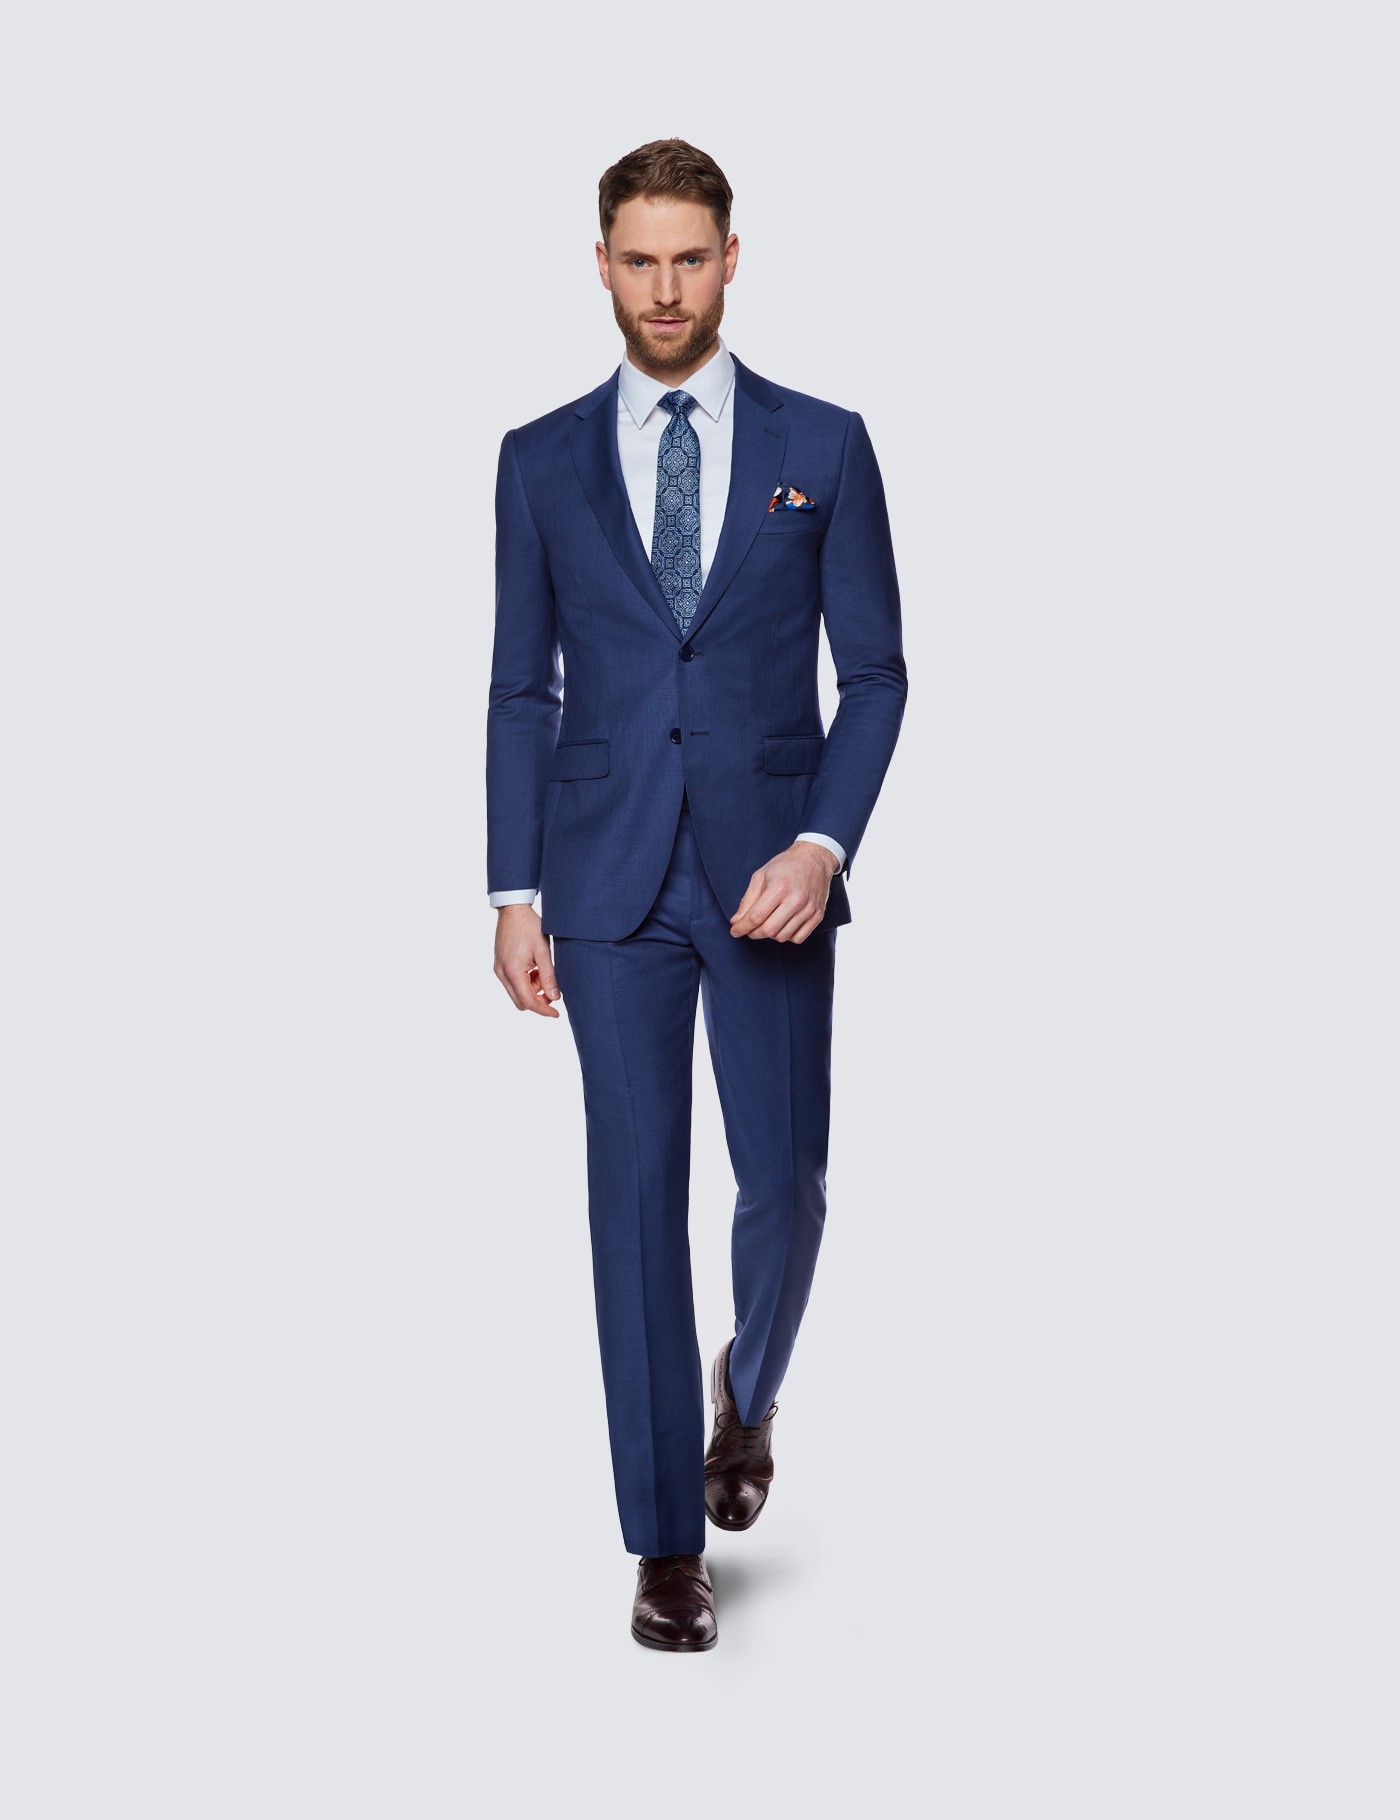 With white shirt, navy blue tie, cobalt blue jacket and brown